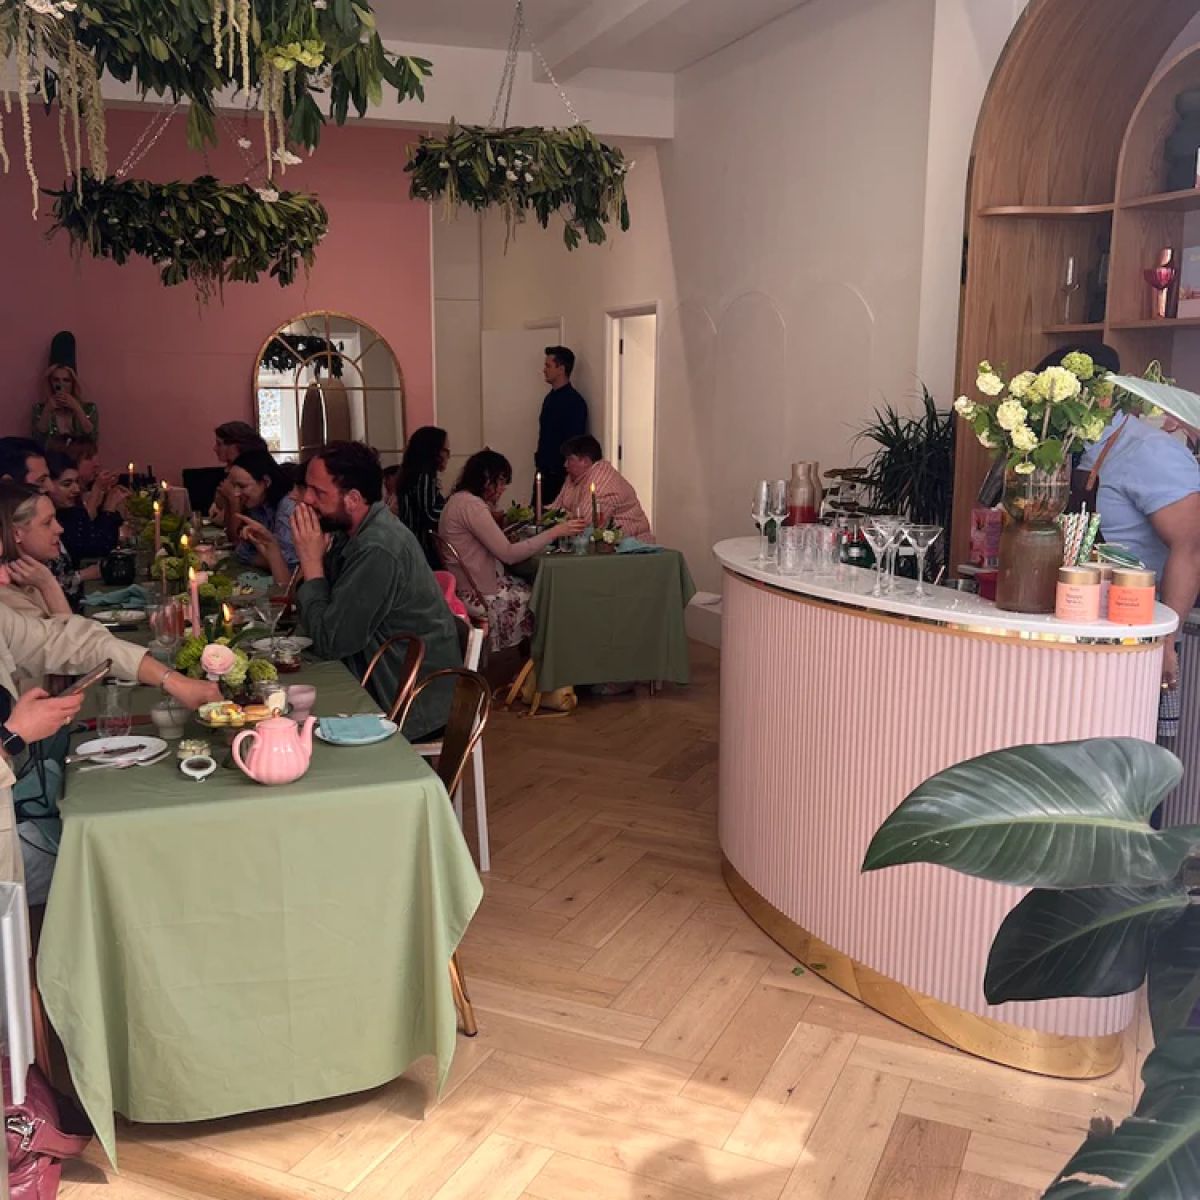 A large group of people enjoying an Oh La La! Macarons event featuring a cocktail bar